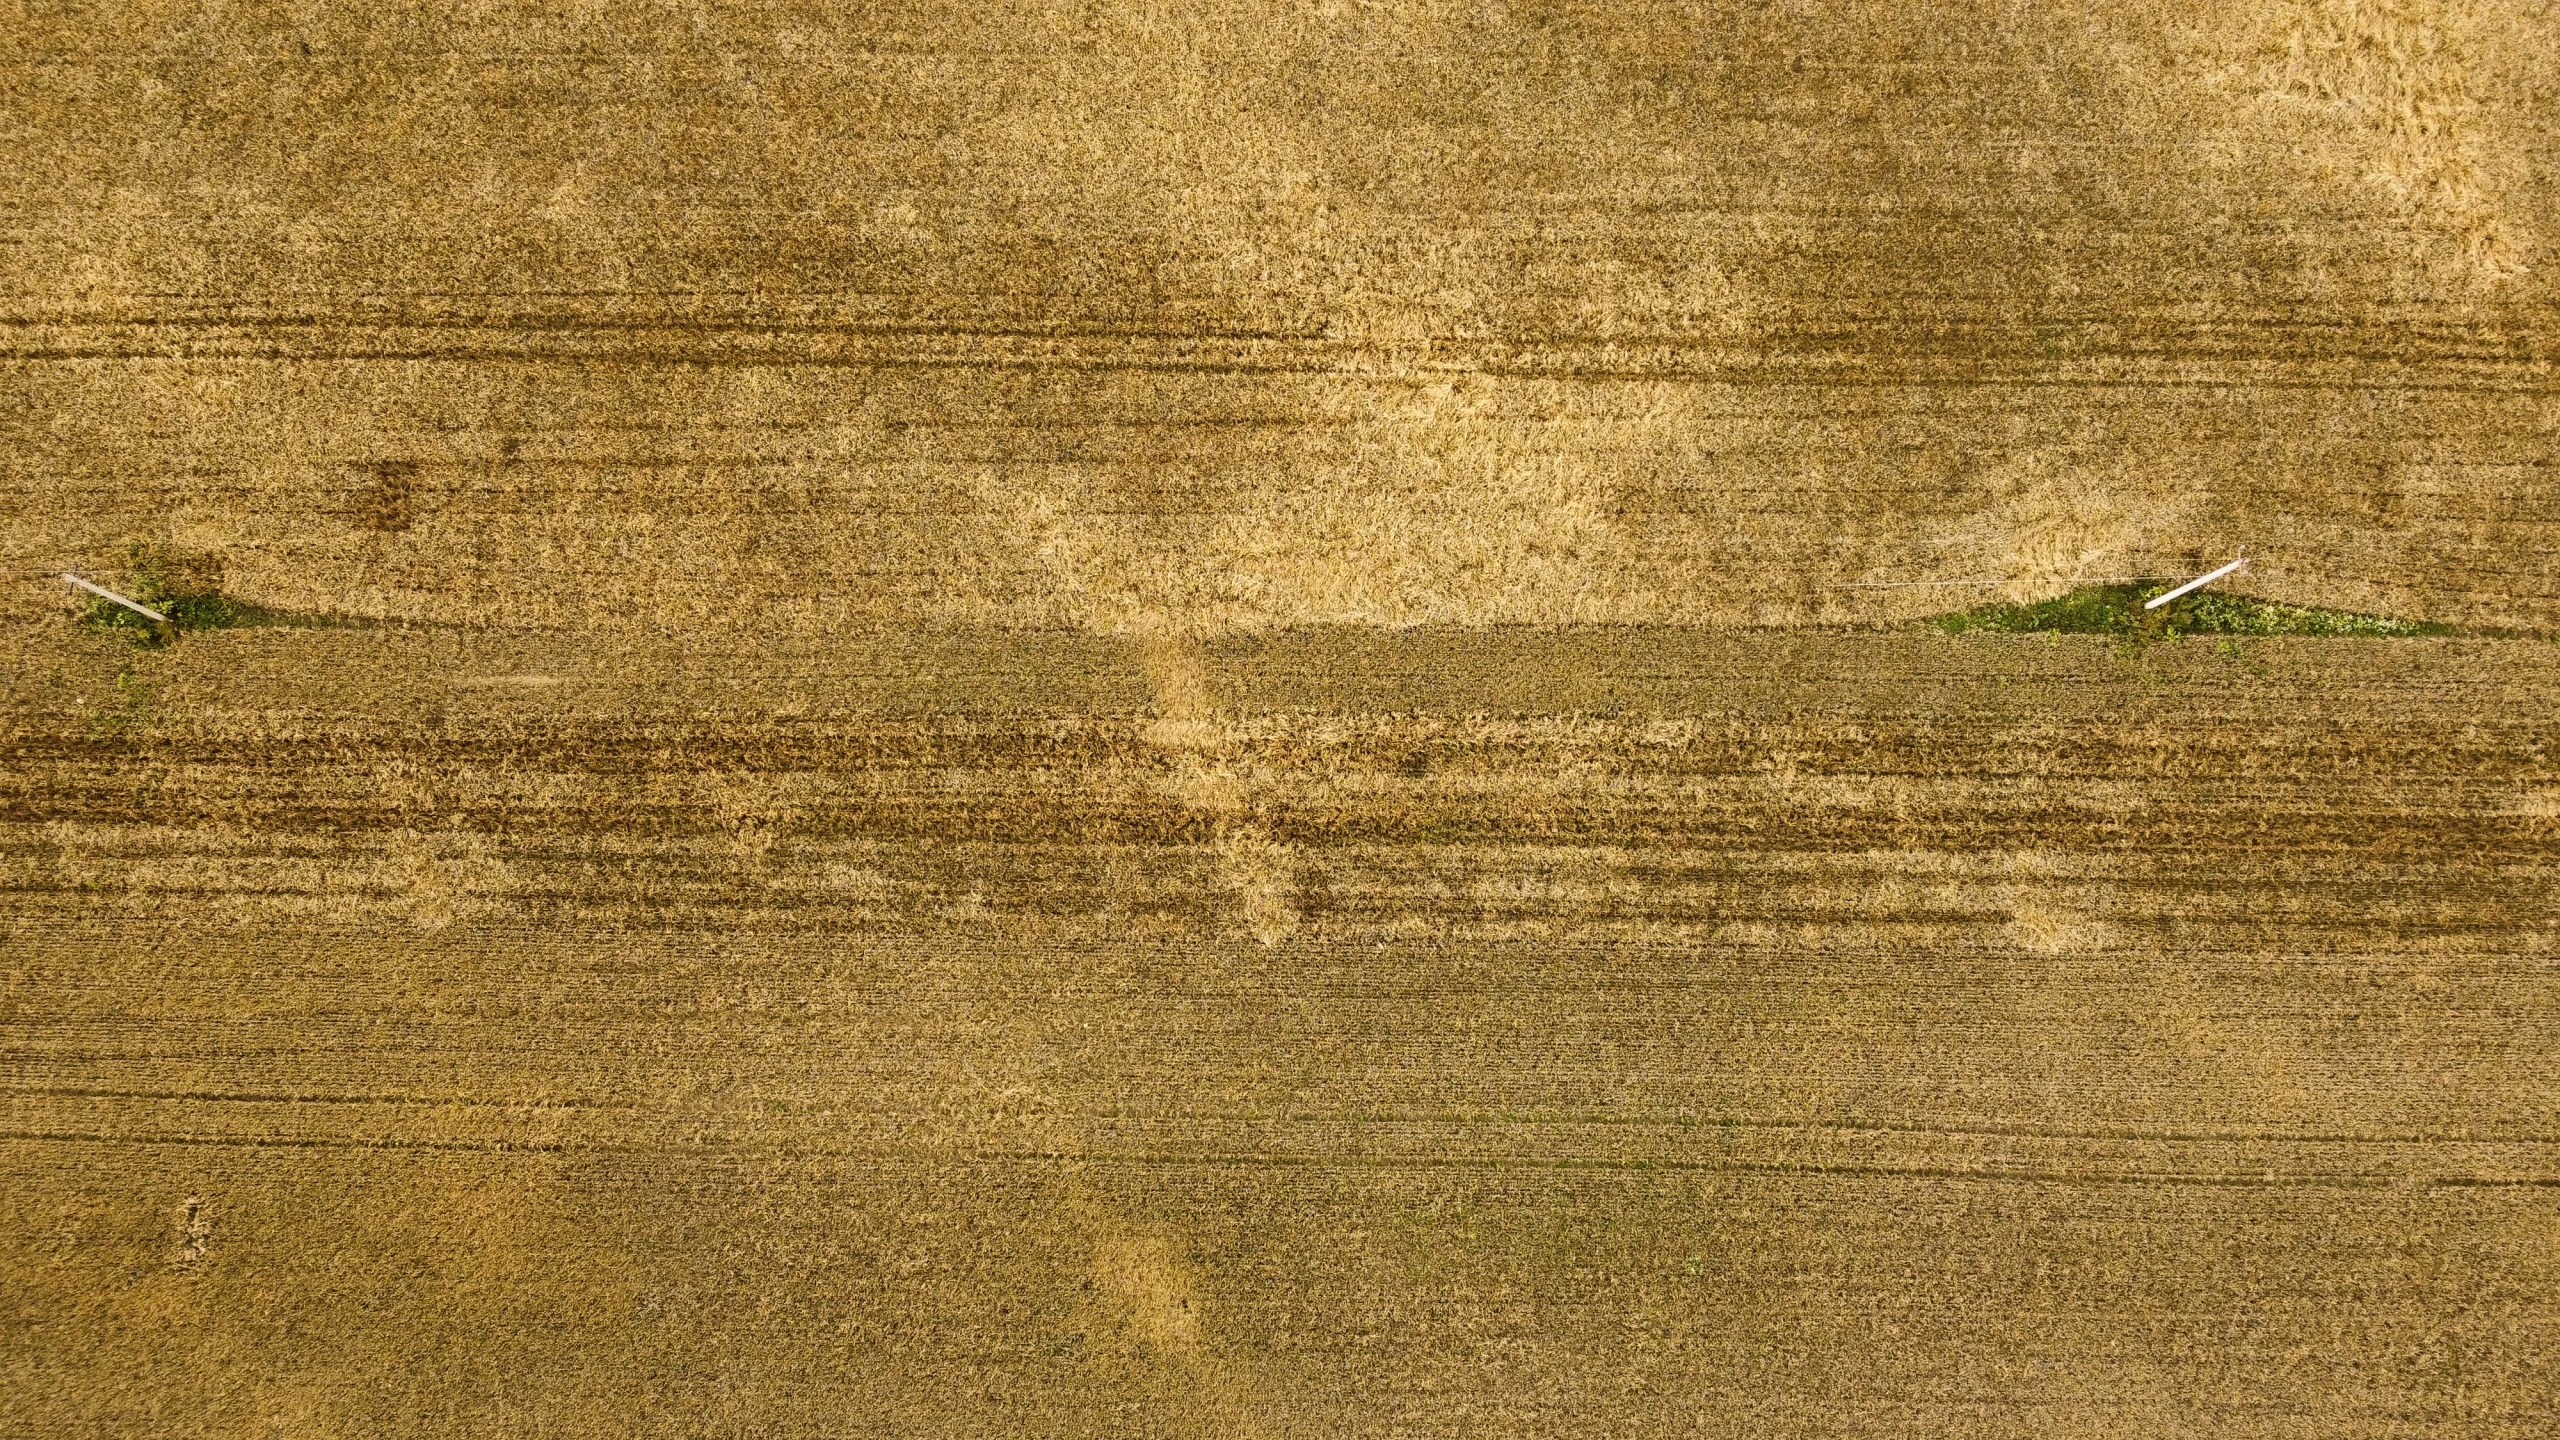 a brown background shows an image with small waves